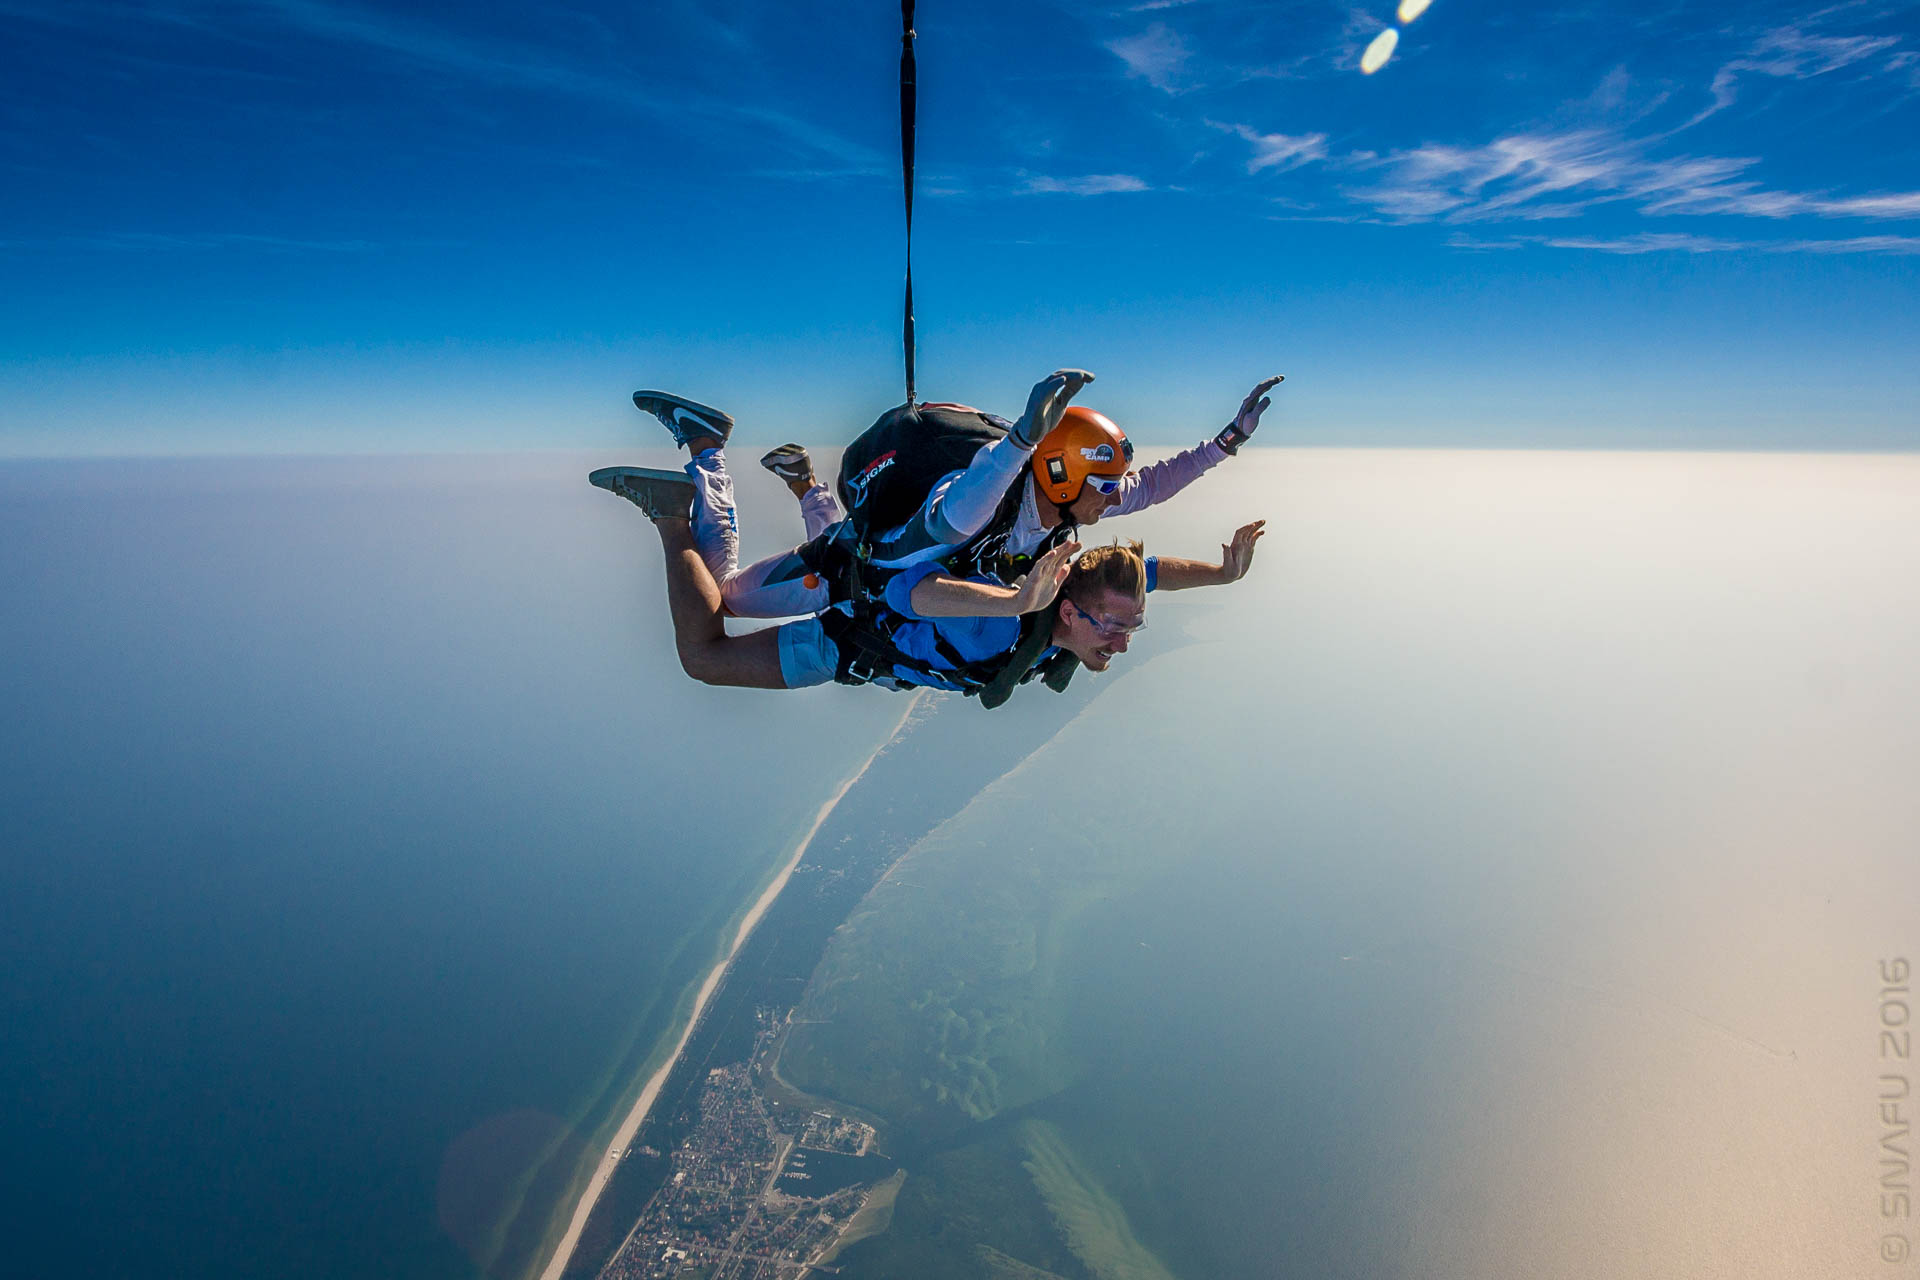 Colorful skydiving photo